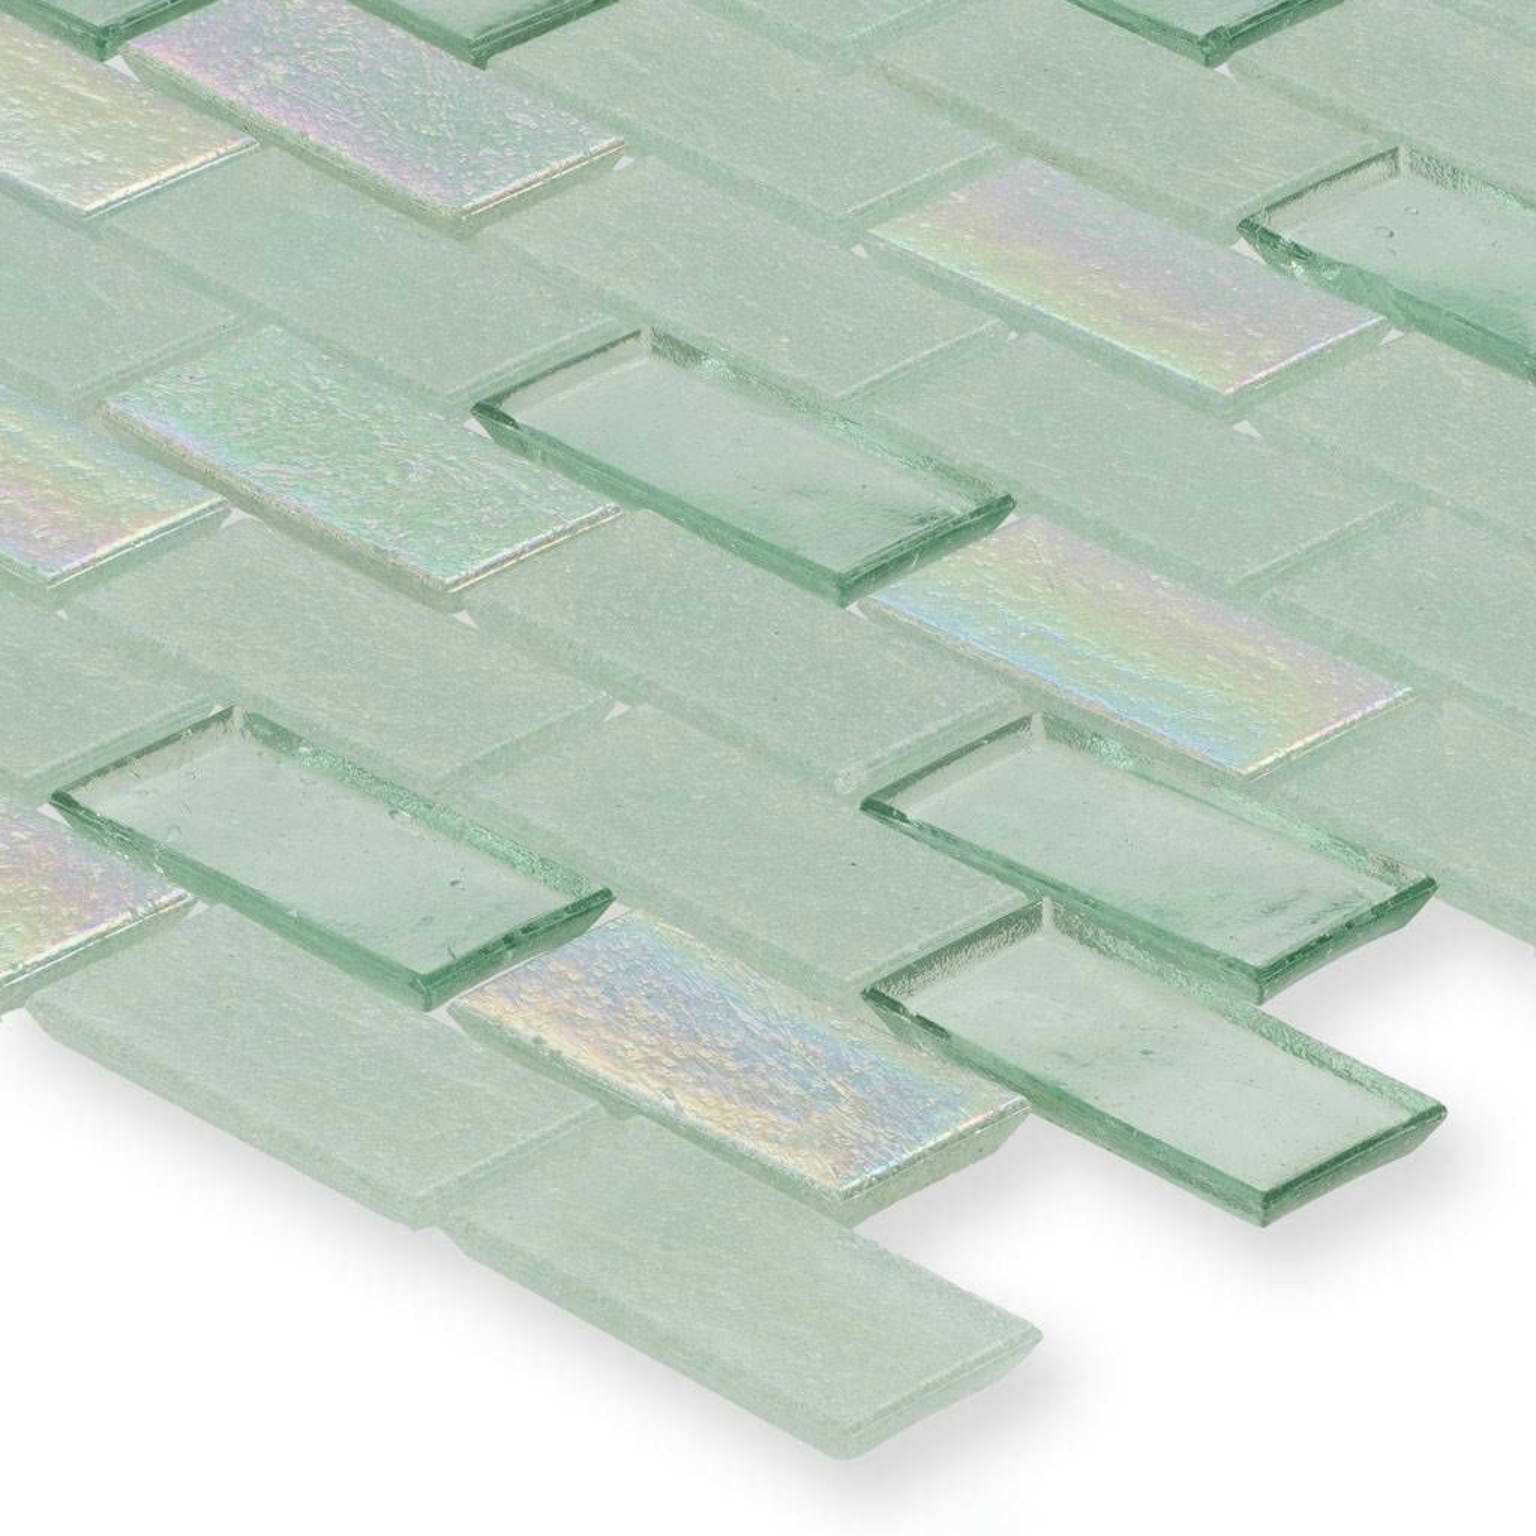 Seagrass Brick | Stones And More | Finest selection of Mosaics, Glass, Tile and Stone